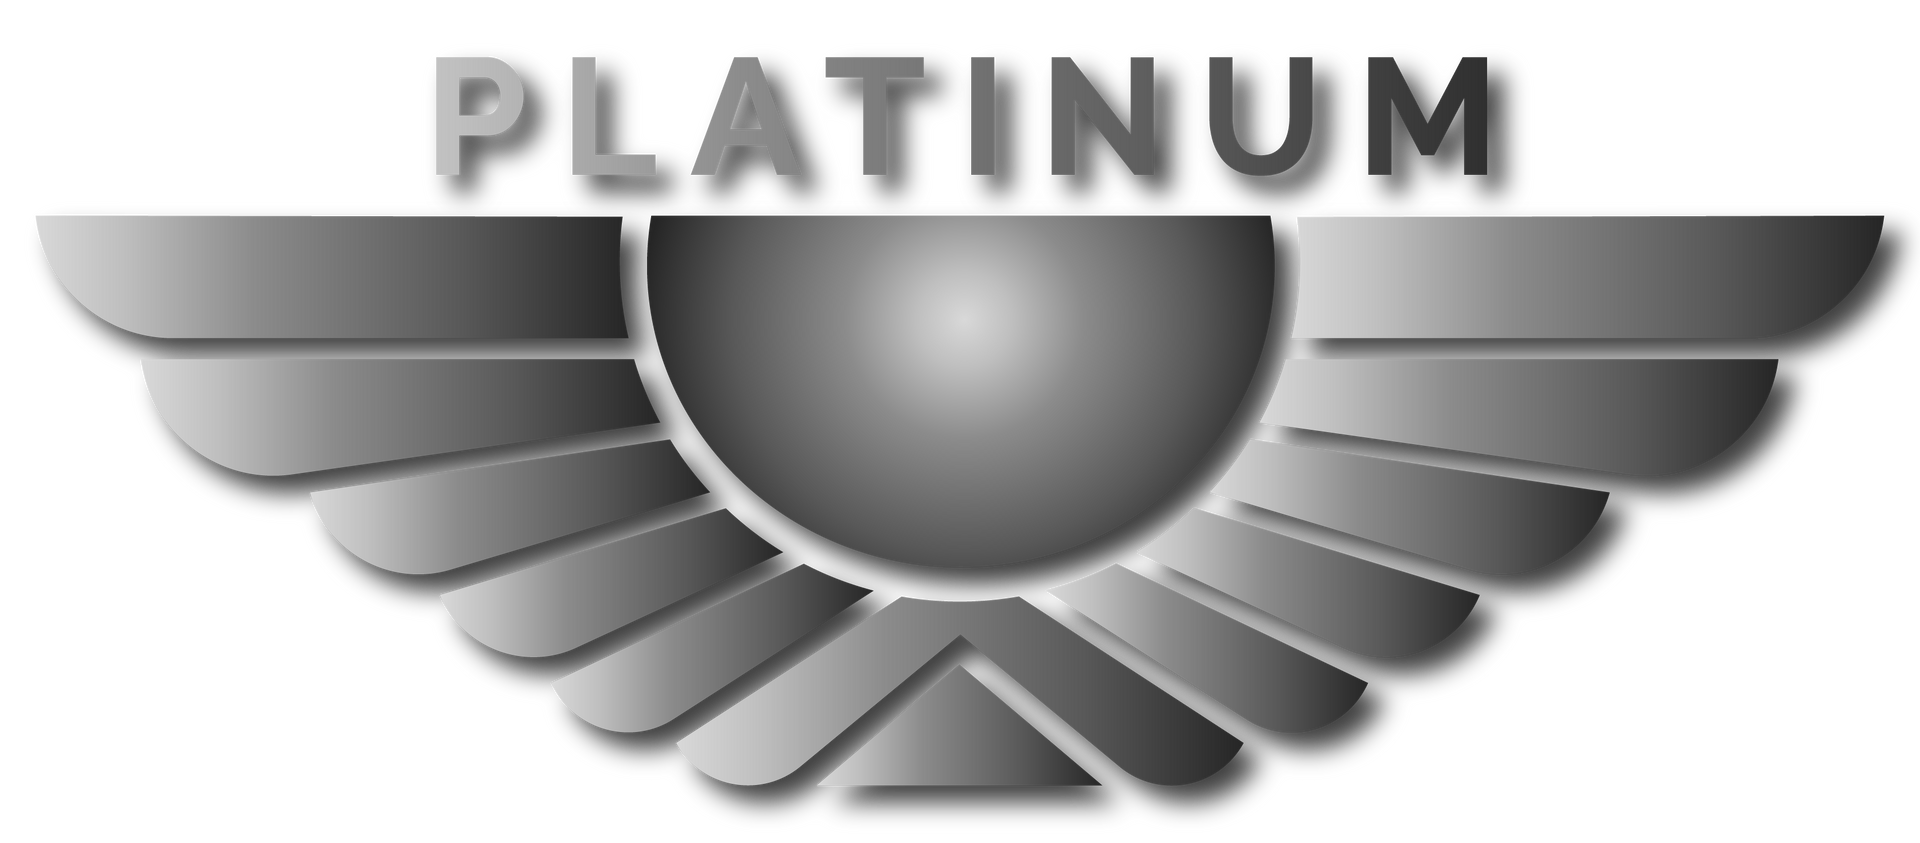 a platinum logo with wings and a ball in the middle